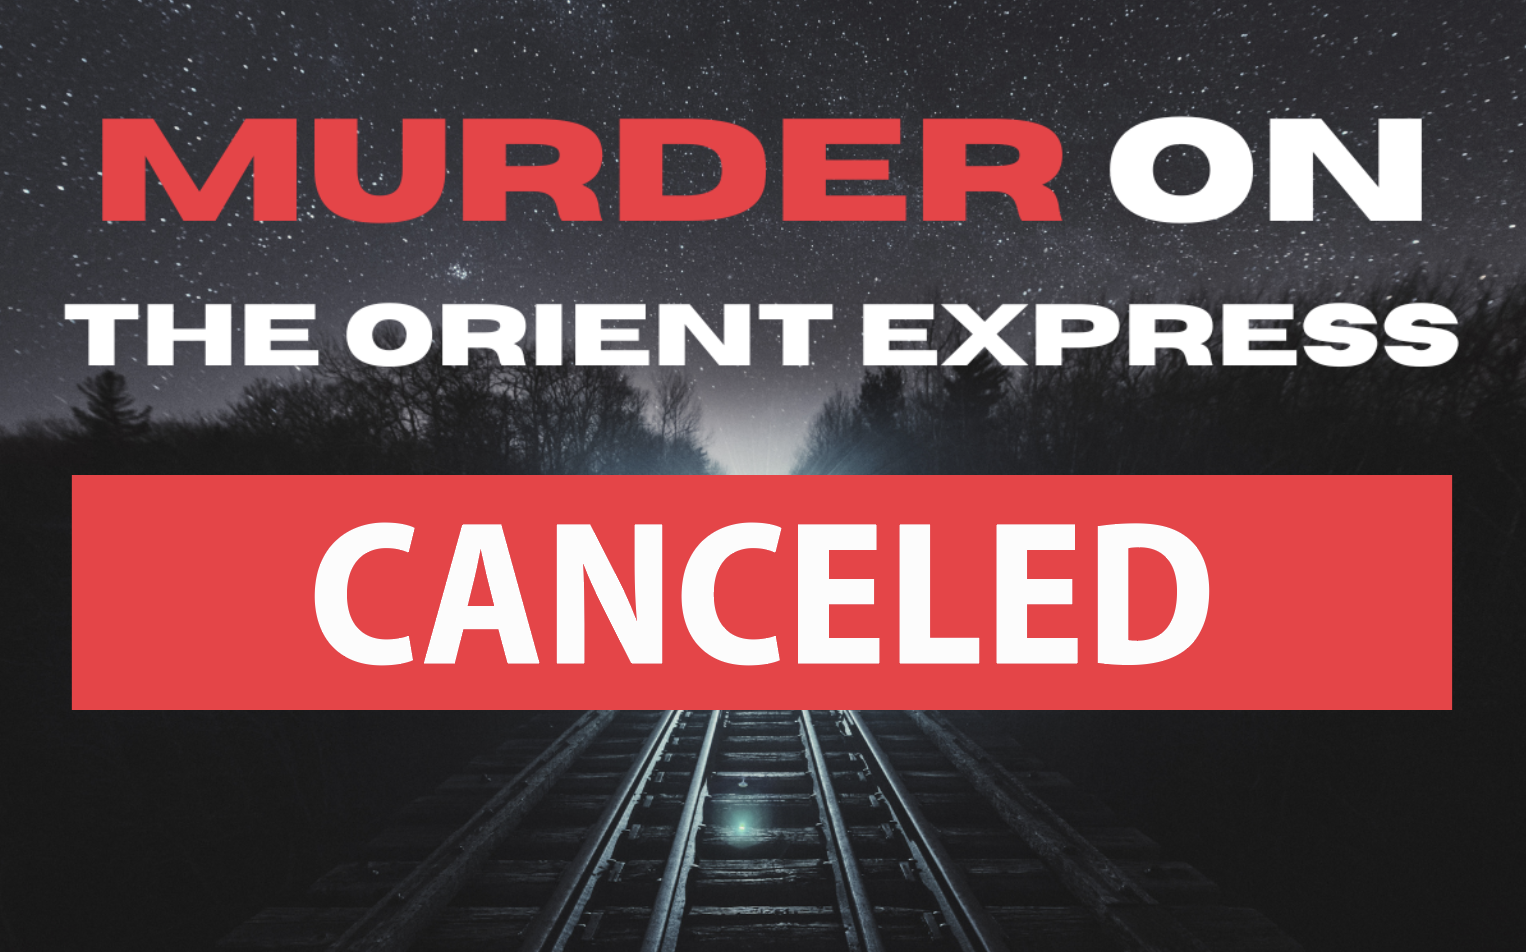 Murder on Orient Express Logo with Cancelled Sign over it.